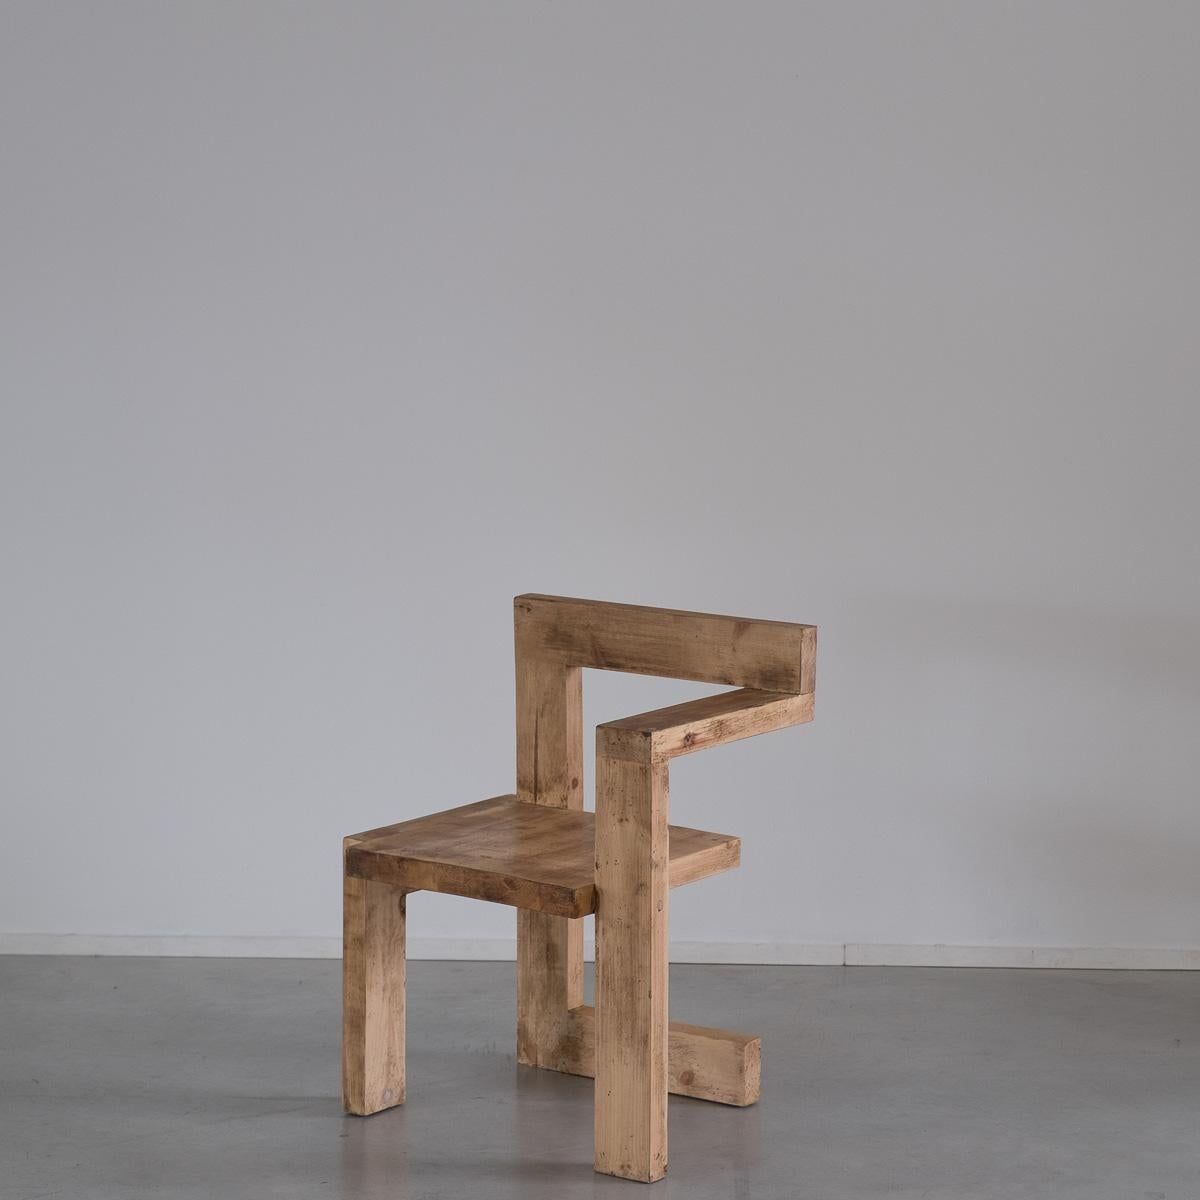 Pine Steltman Chair by Gerrit Rietveld, Producer Unknown, Late 20th Century